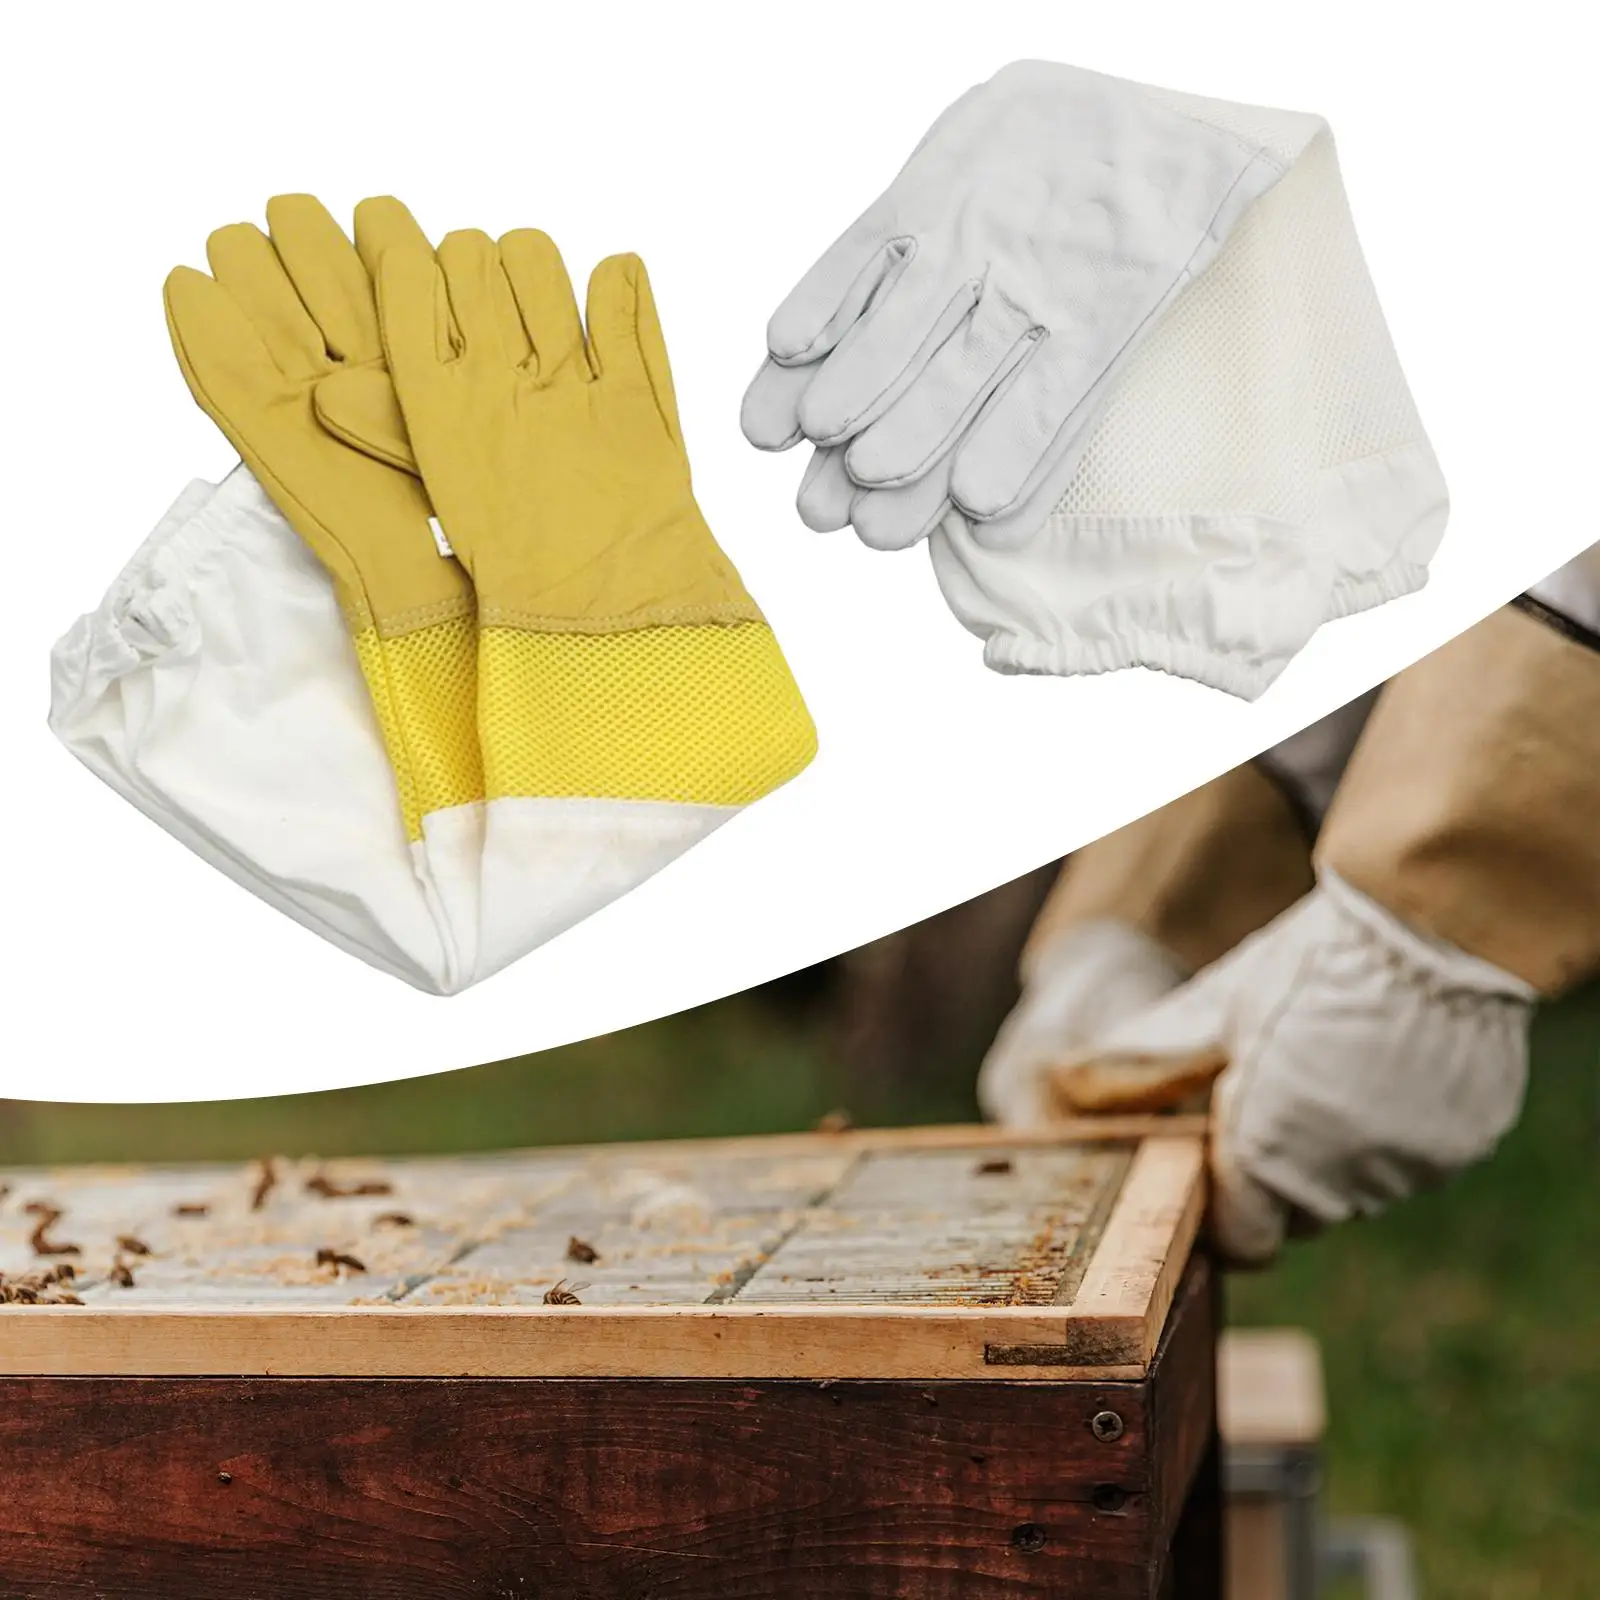 Beekeeping Gloves Protective Sleeves Anti Sting Durable Comfortable Beekeeper Gloves for Unisex Adults Women Cactus Rose Pruning